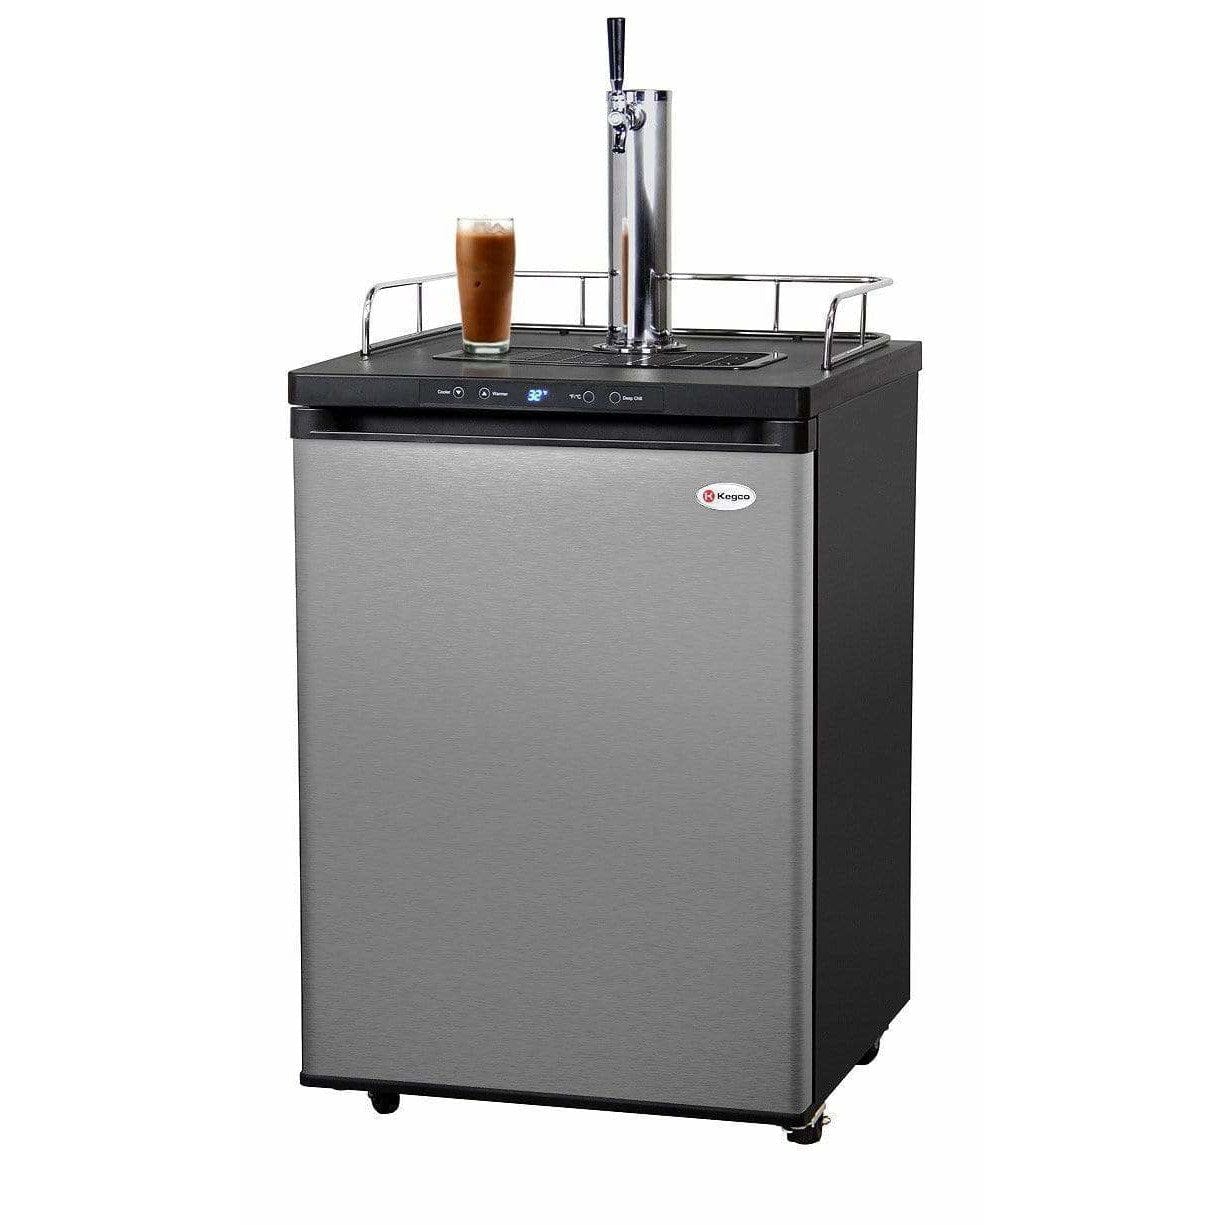 Kegco 24" Wide Cold Brew Coffee Single Tap Stainless Steel Kegerator ICK30S-1 Wine Coolers Empire